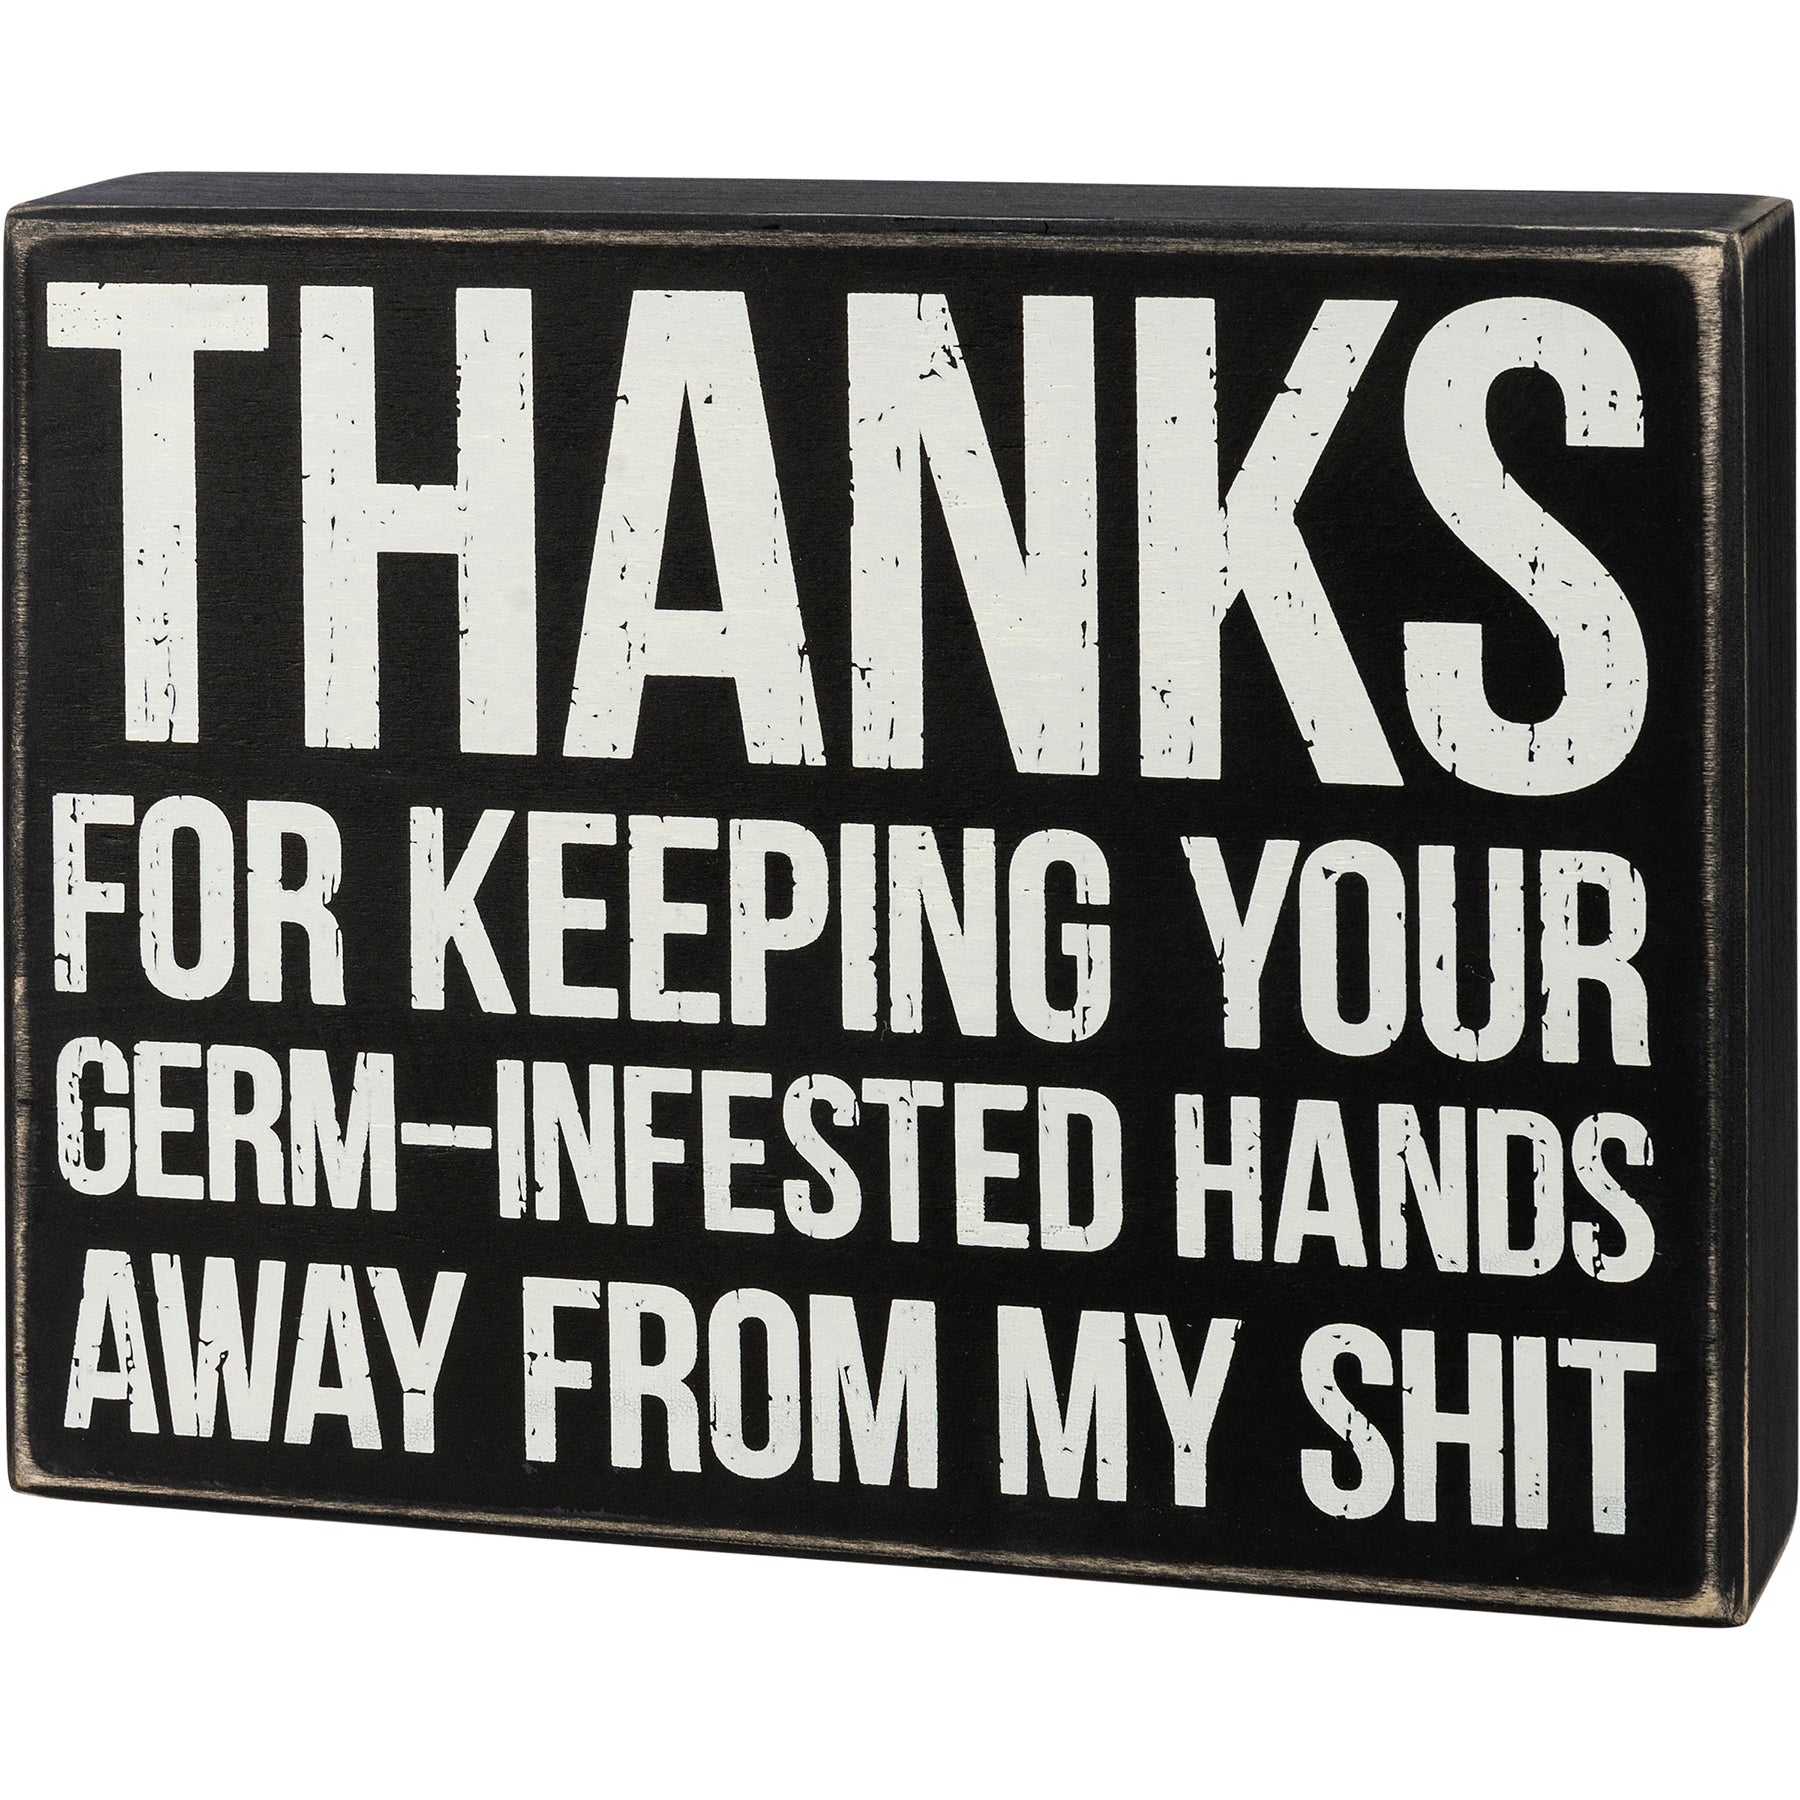 Thank You For Keeping Your Germ-Infested Hands Away From My Shit Box Sign in Black with White Lettering